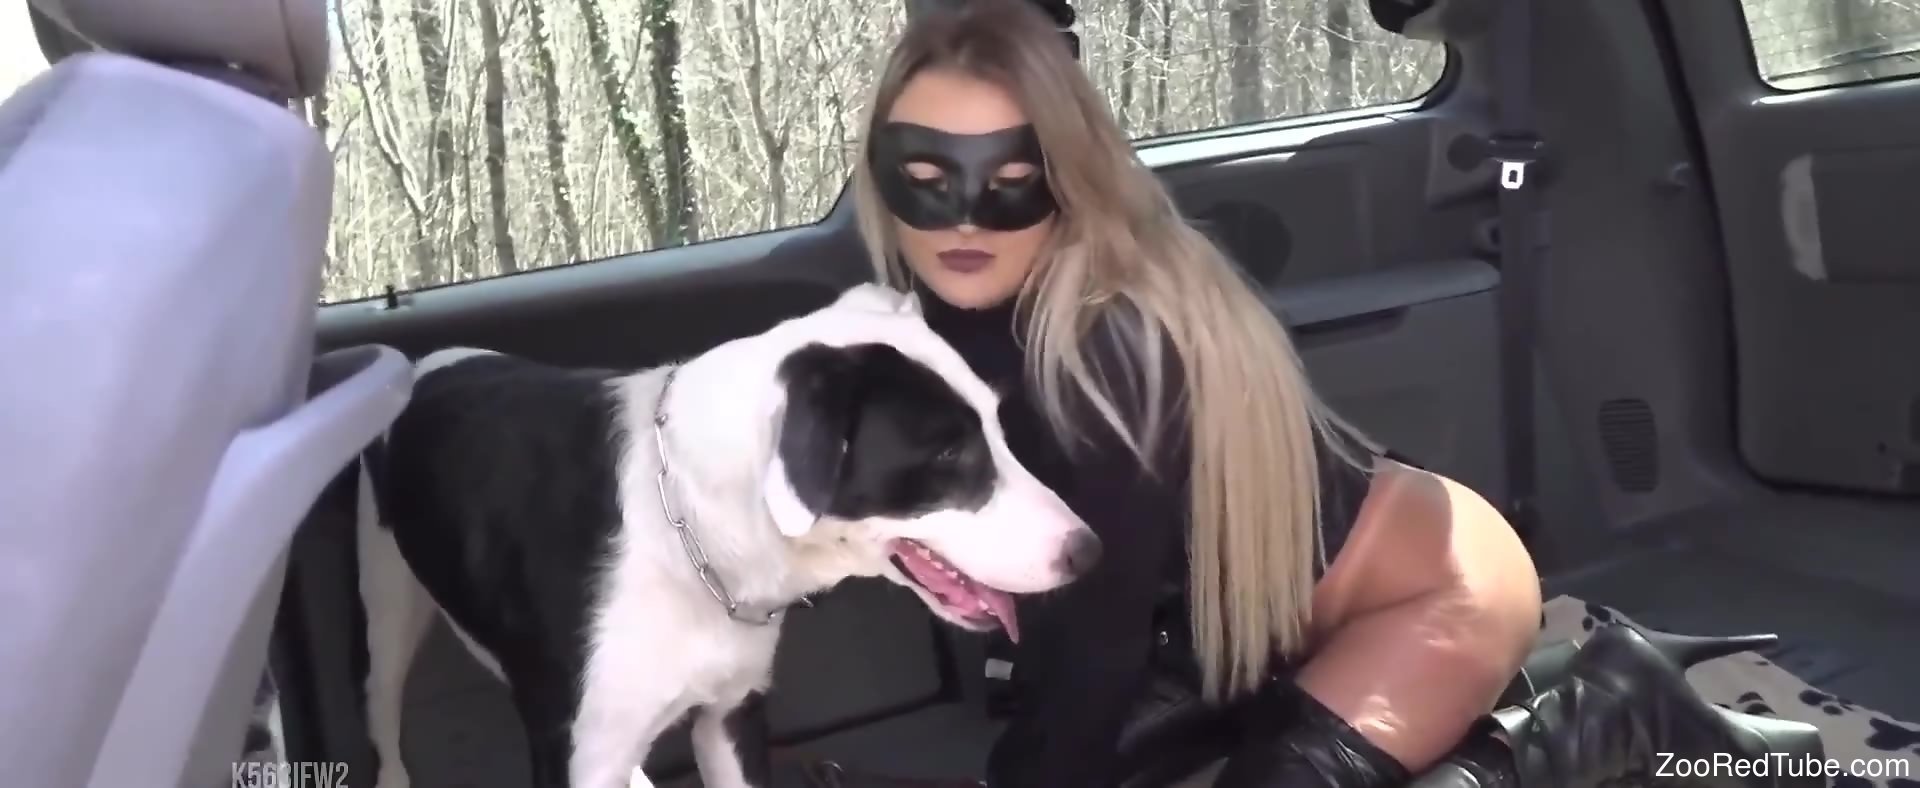 Sixy Dog Girl - Fine woman with sexy ass, doggy porn with a real dog in the car